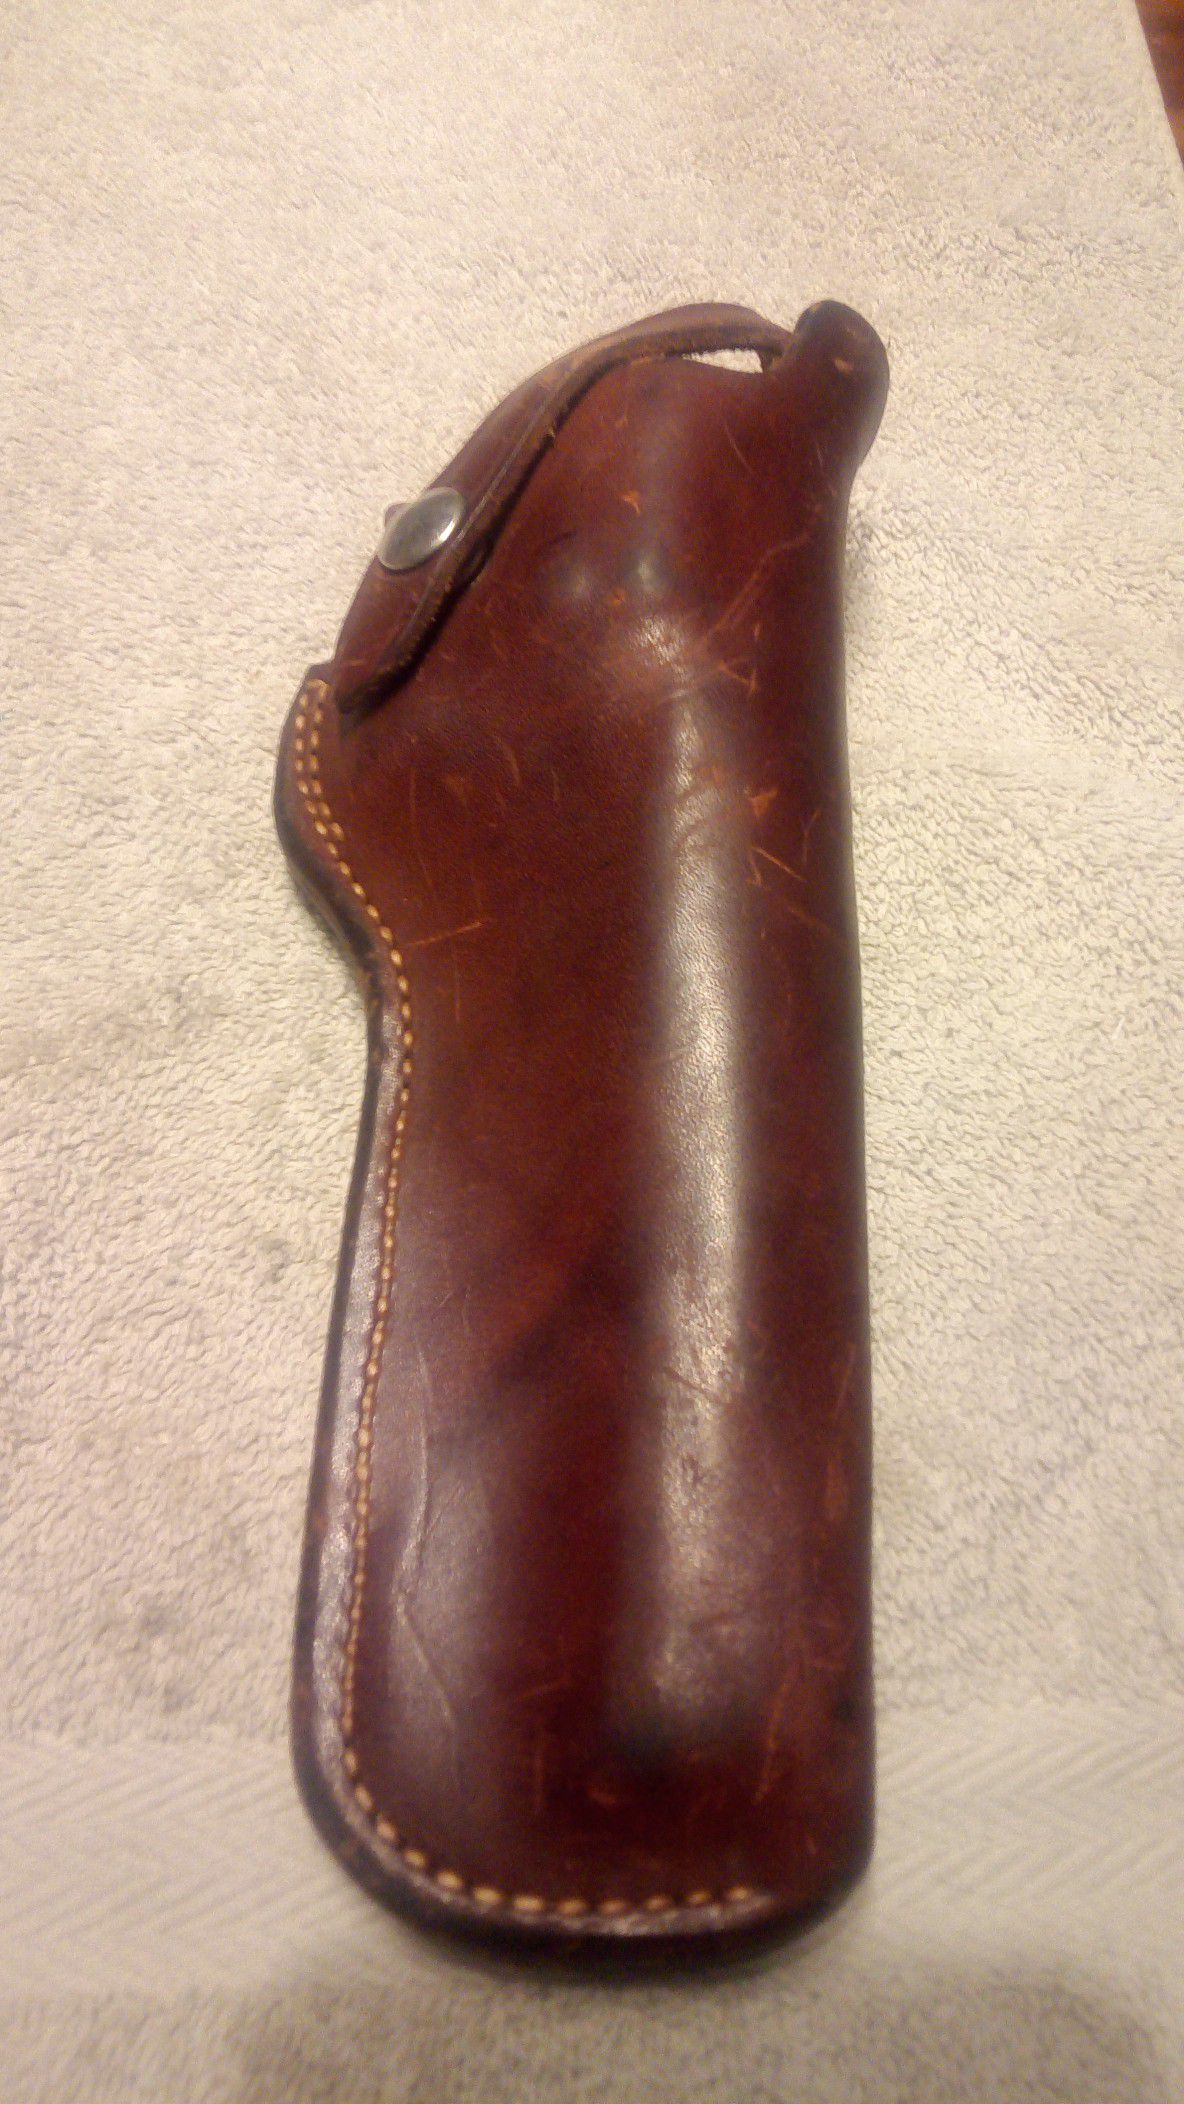 Genuine leather and other